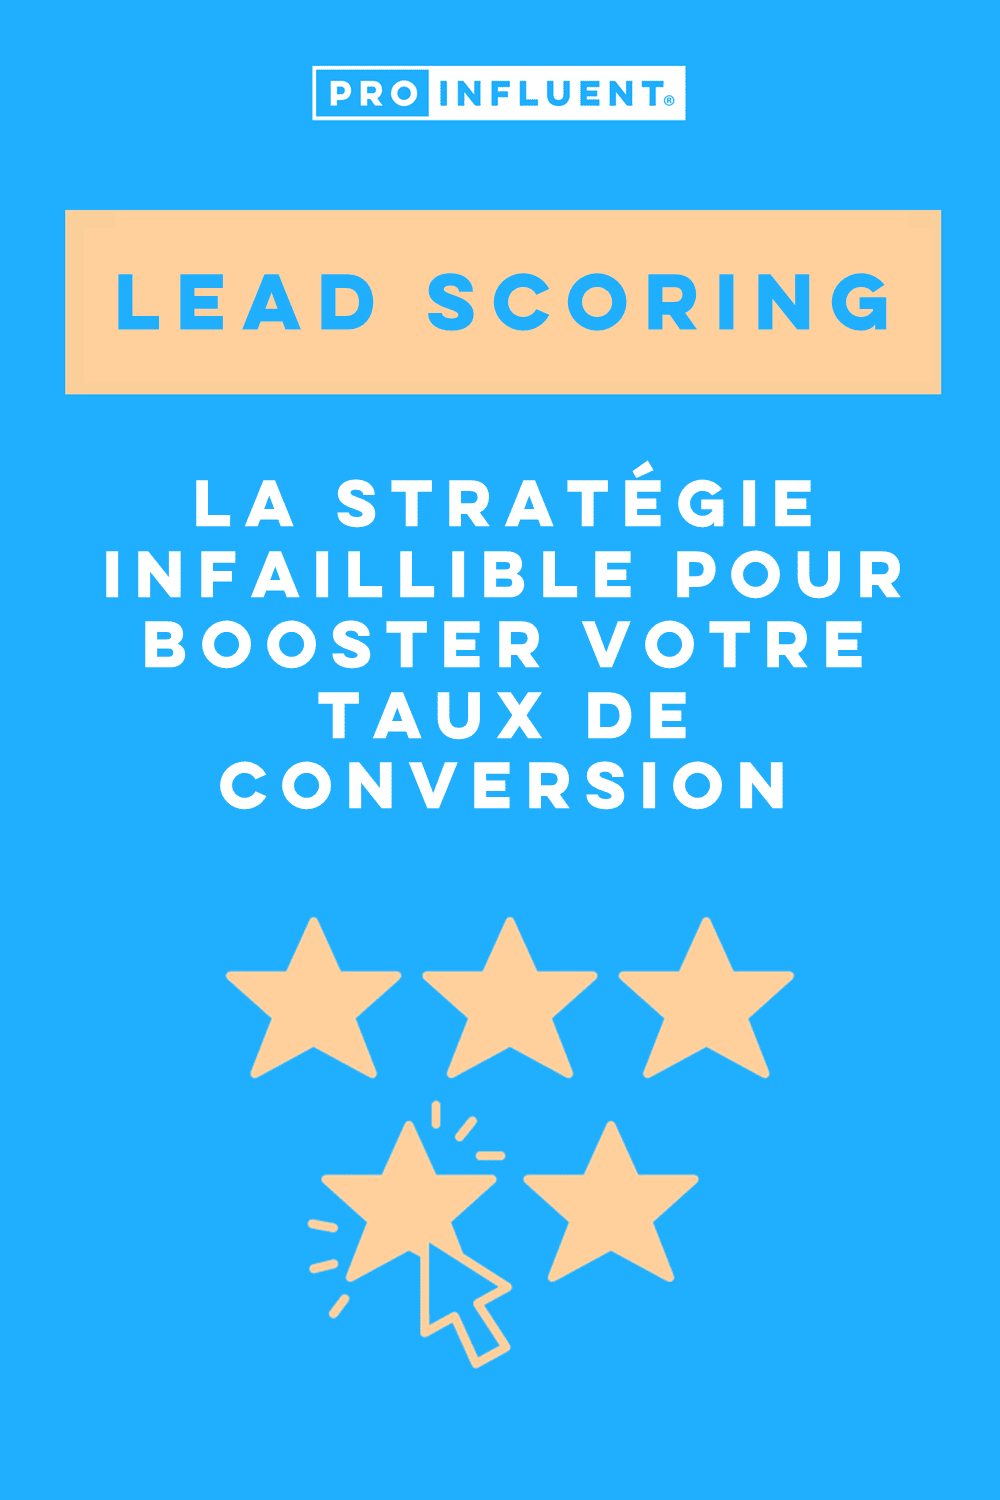 Lead scoring, the infallible strategy to boost your conversion rate